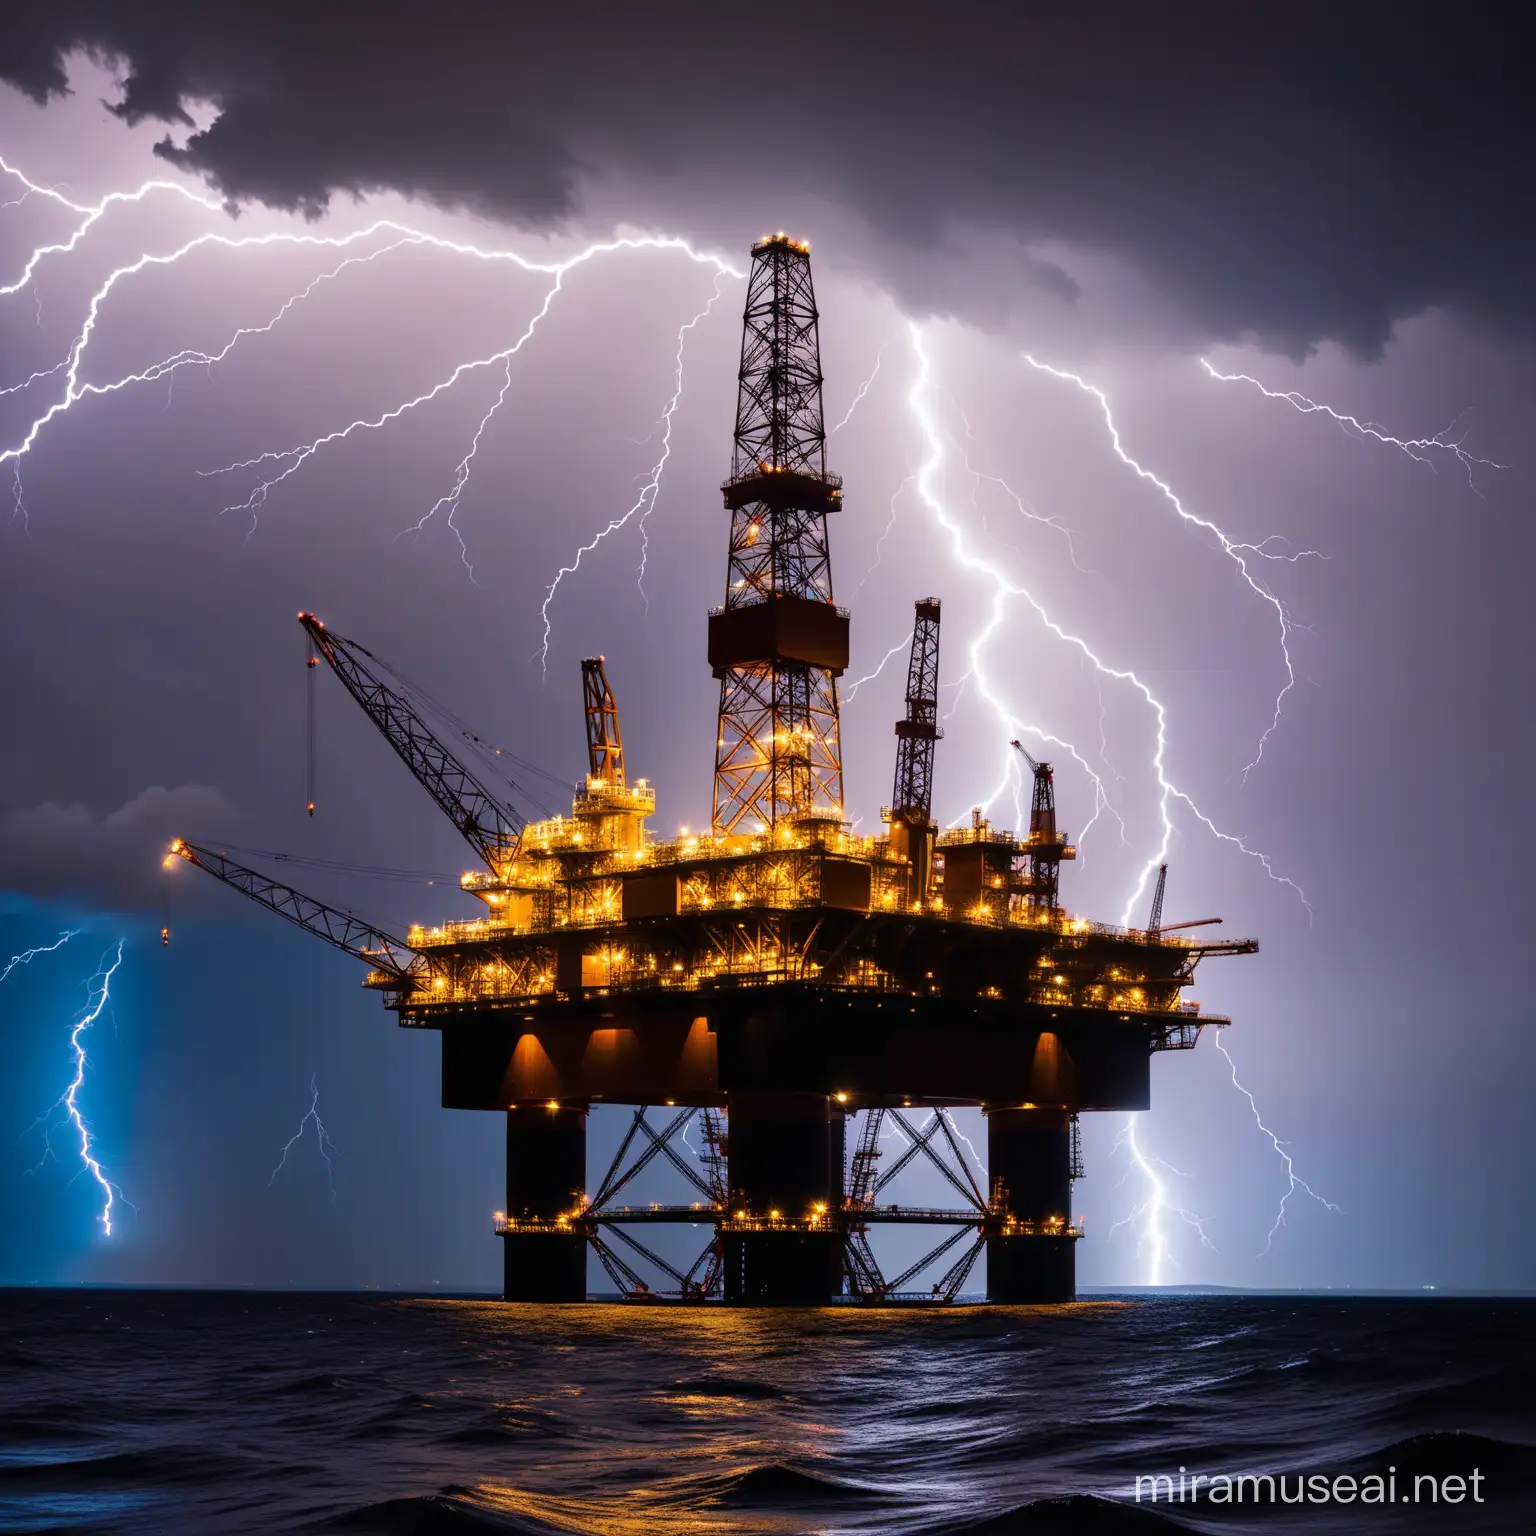 Large oil rig with lightning in the background.